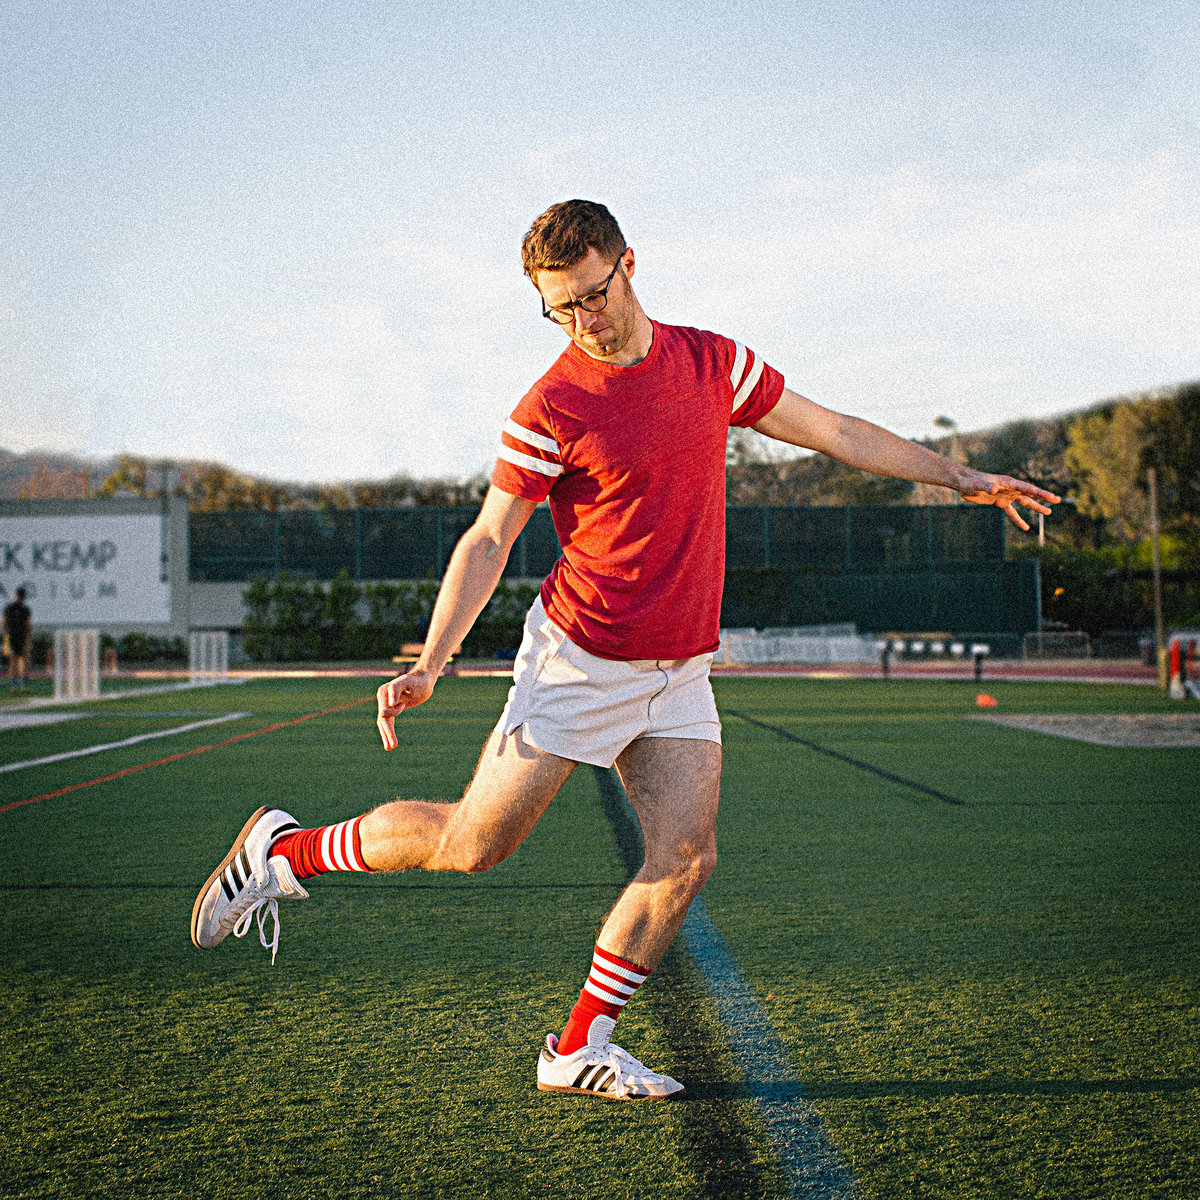 Vulfpeck album cover artwork for The Beautiful Game. Photo by: Vulfpeck